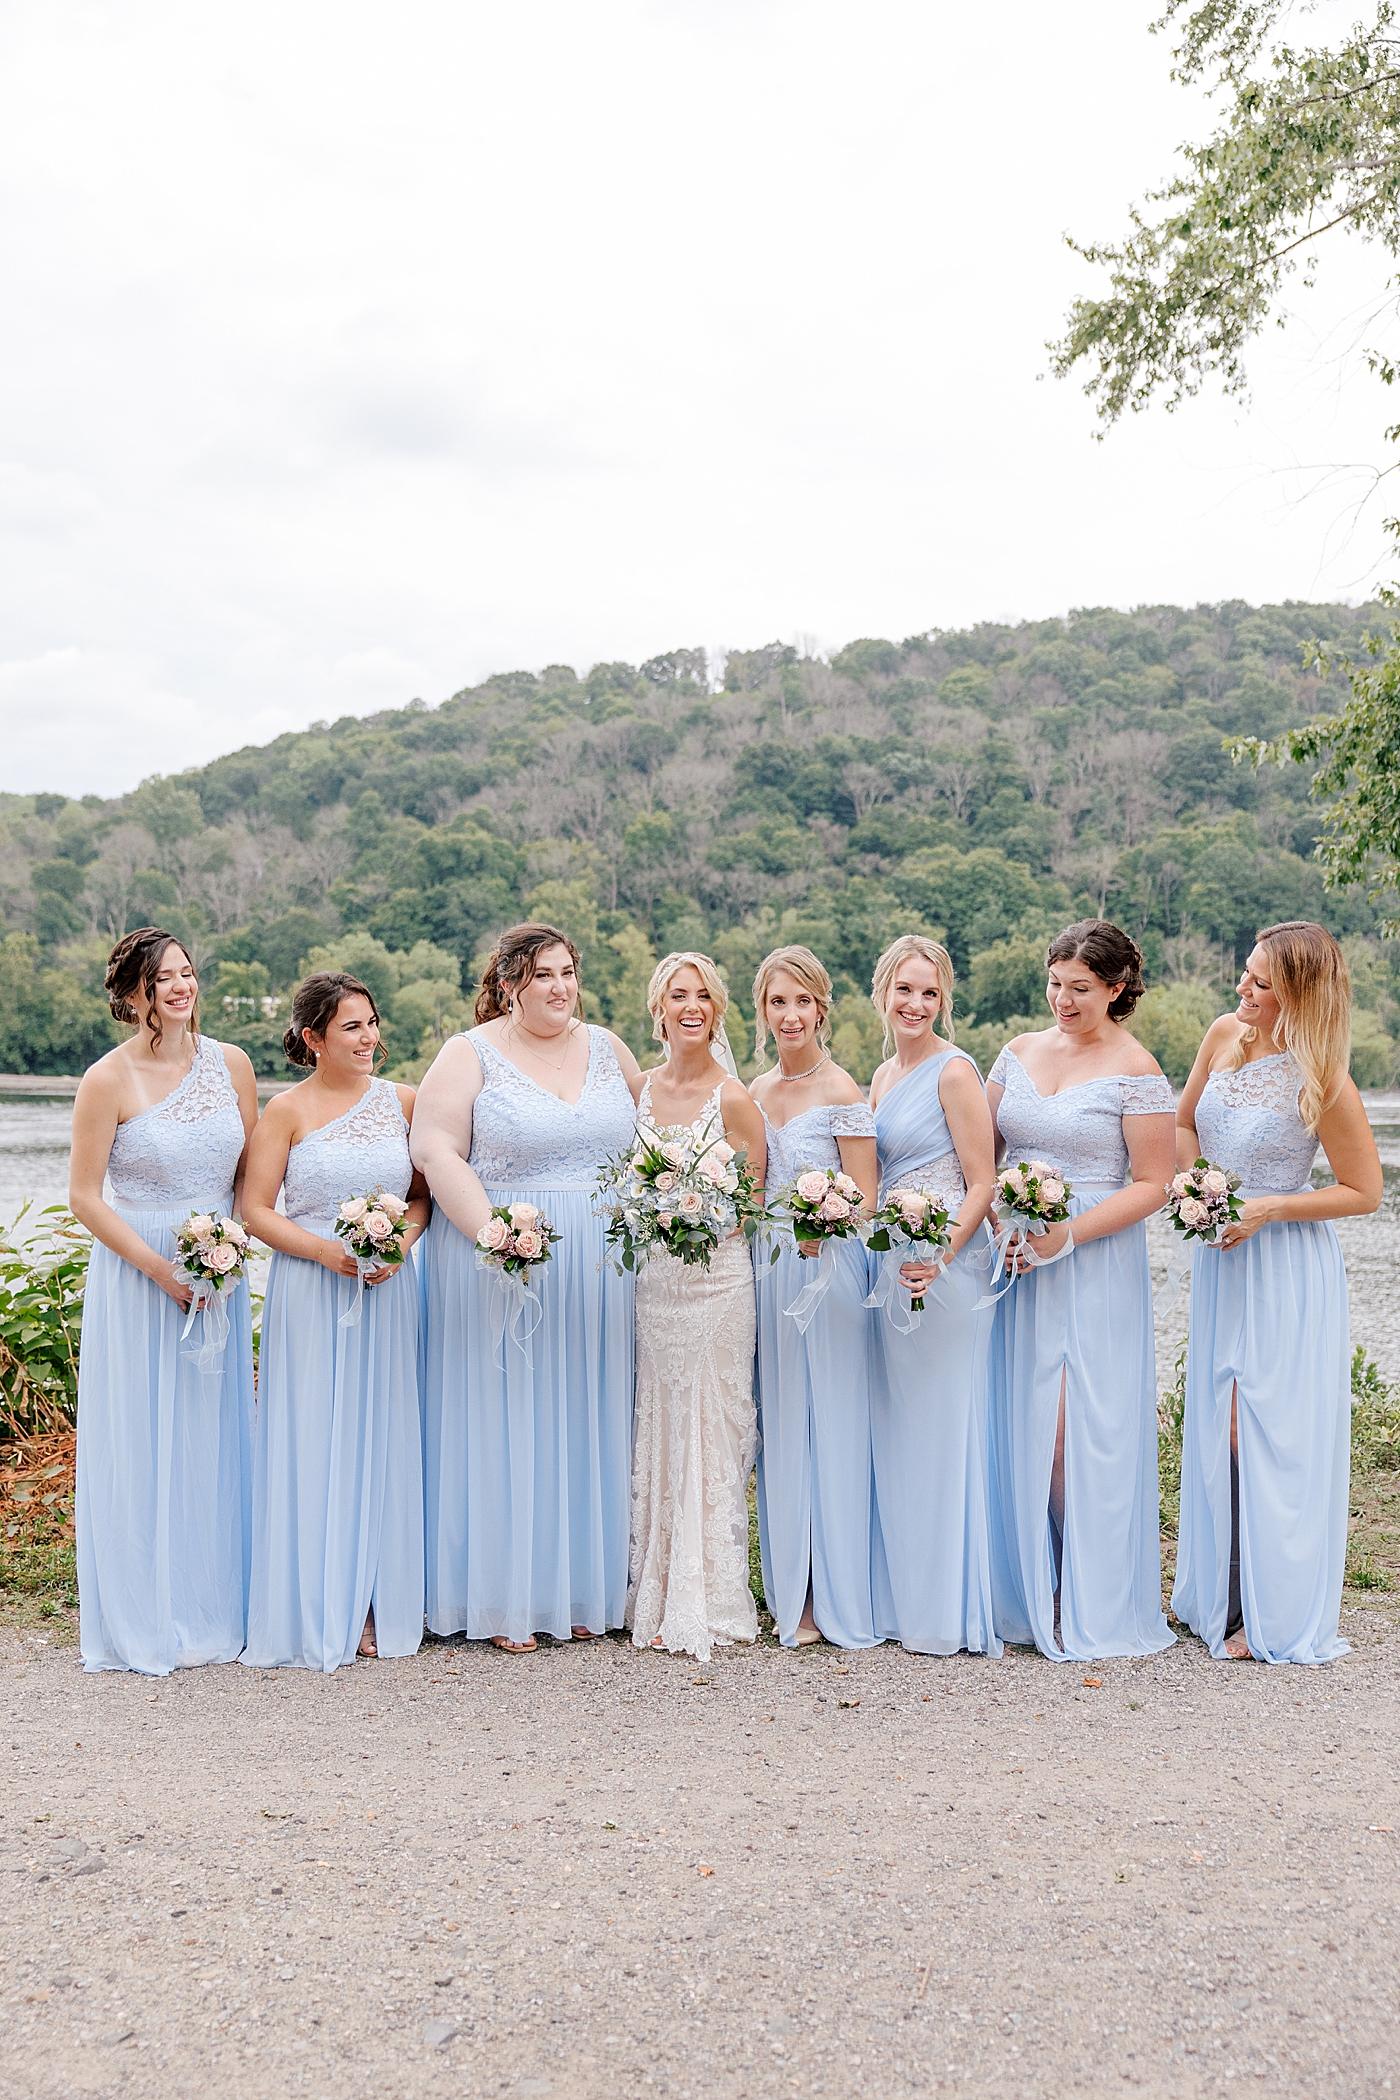 Bride with her bridesmaids | Image by Hope Helmuth Photography